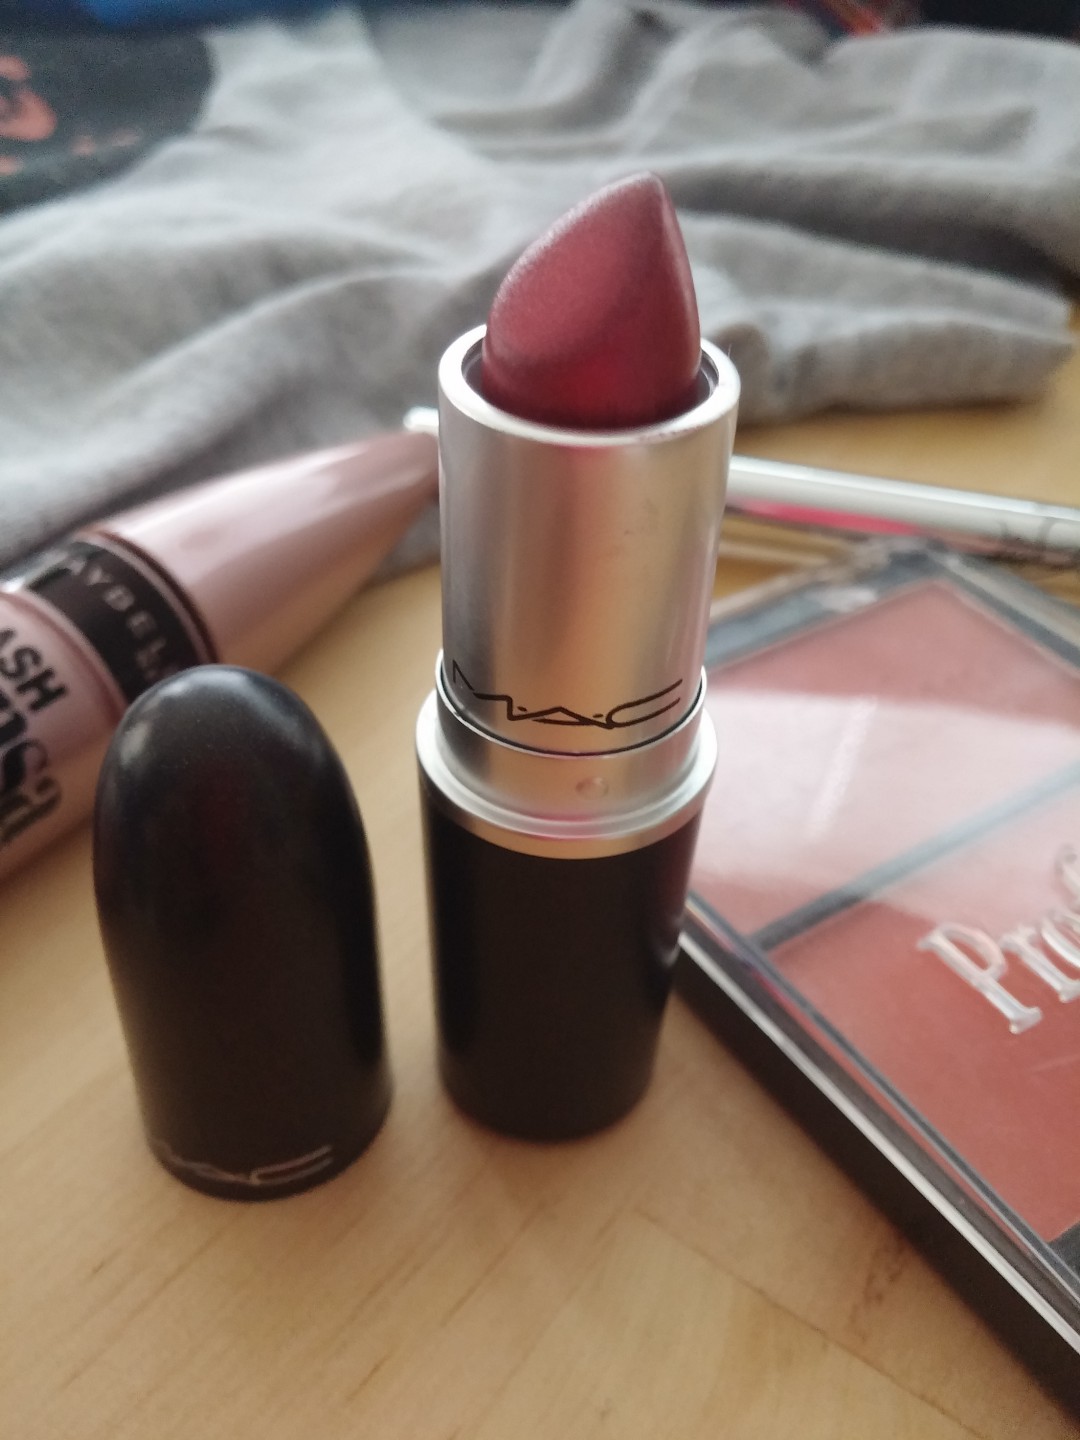 Here's the gorgeous lipstick hanging out with some other makeup buddies. 